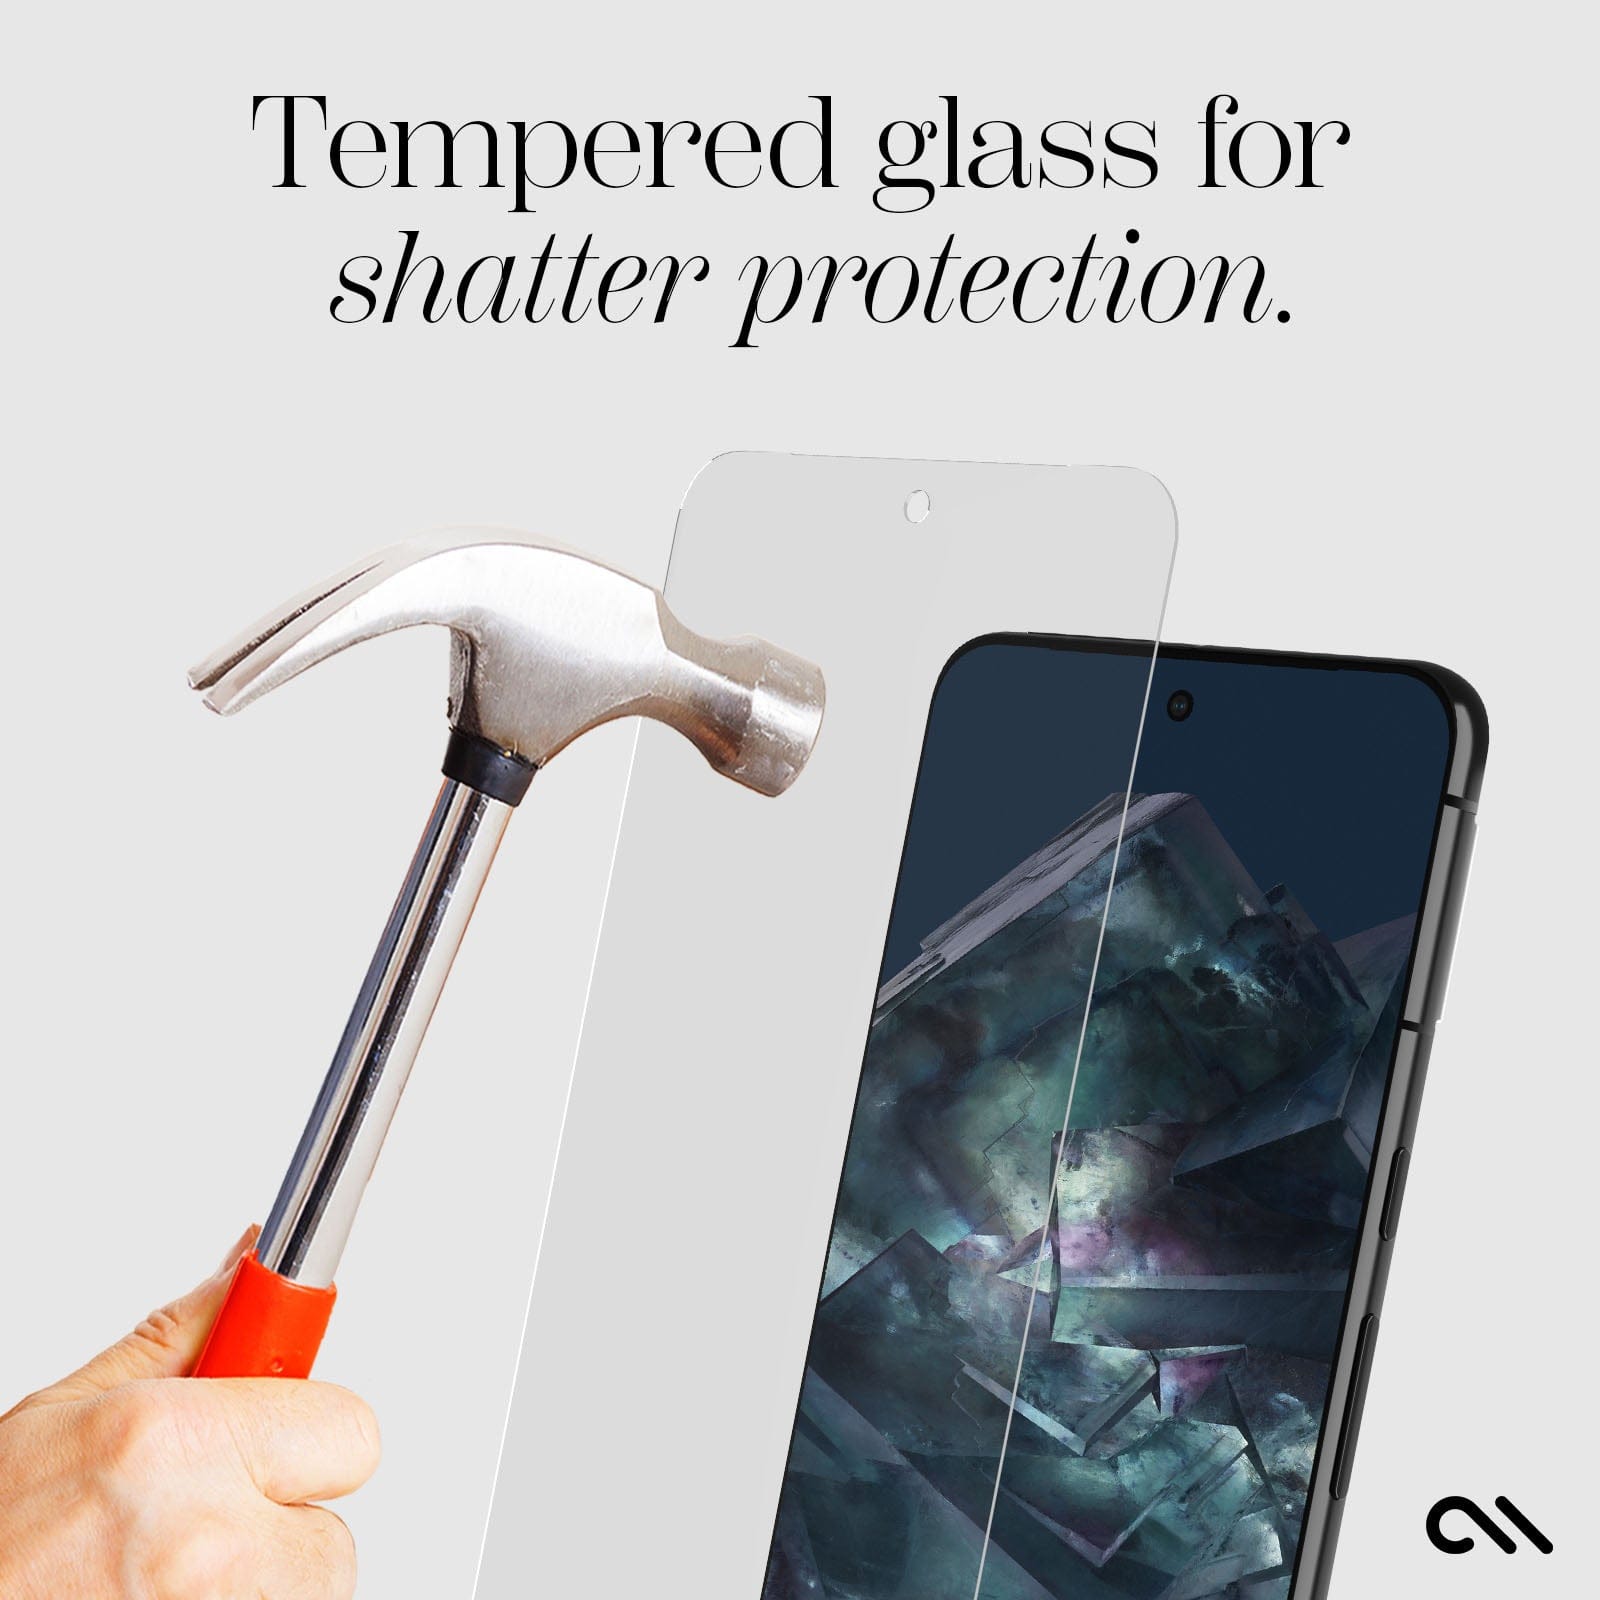 TEMPERED GLASS SHATTER PROTECTION